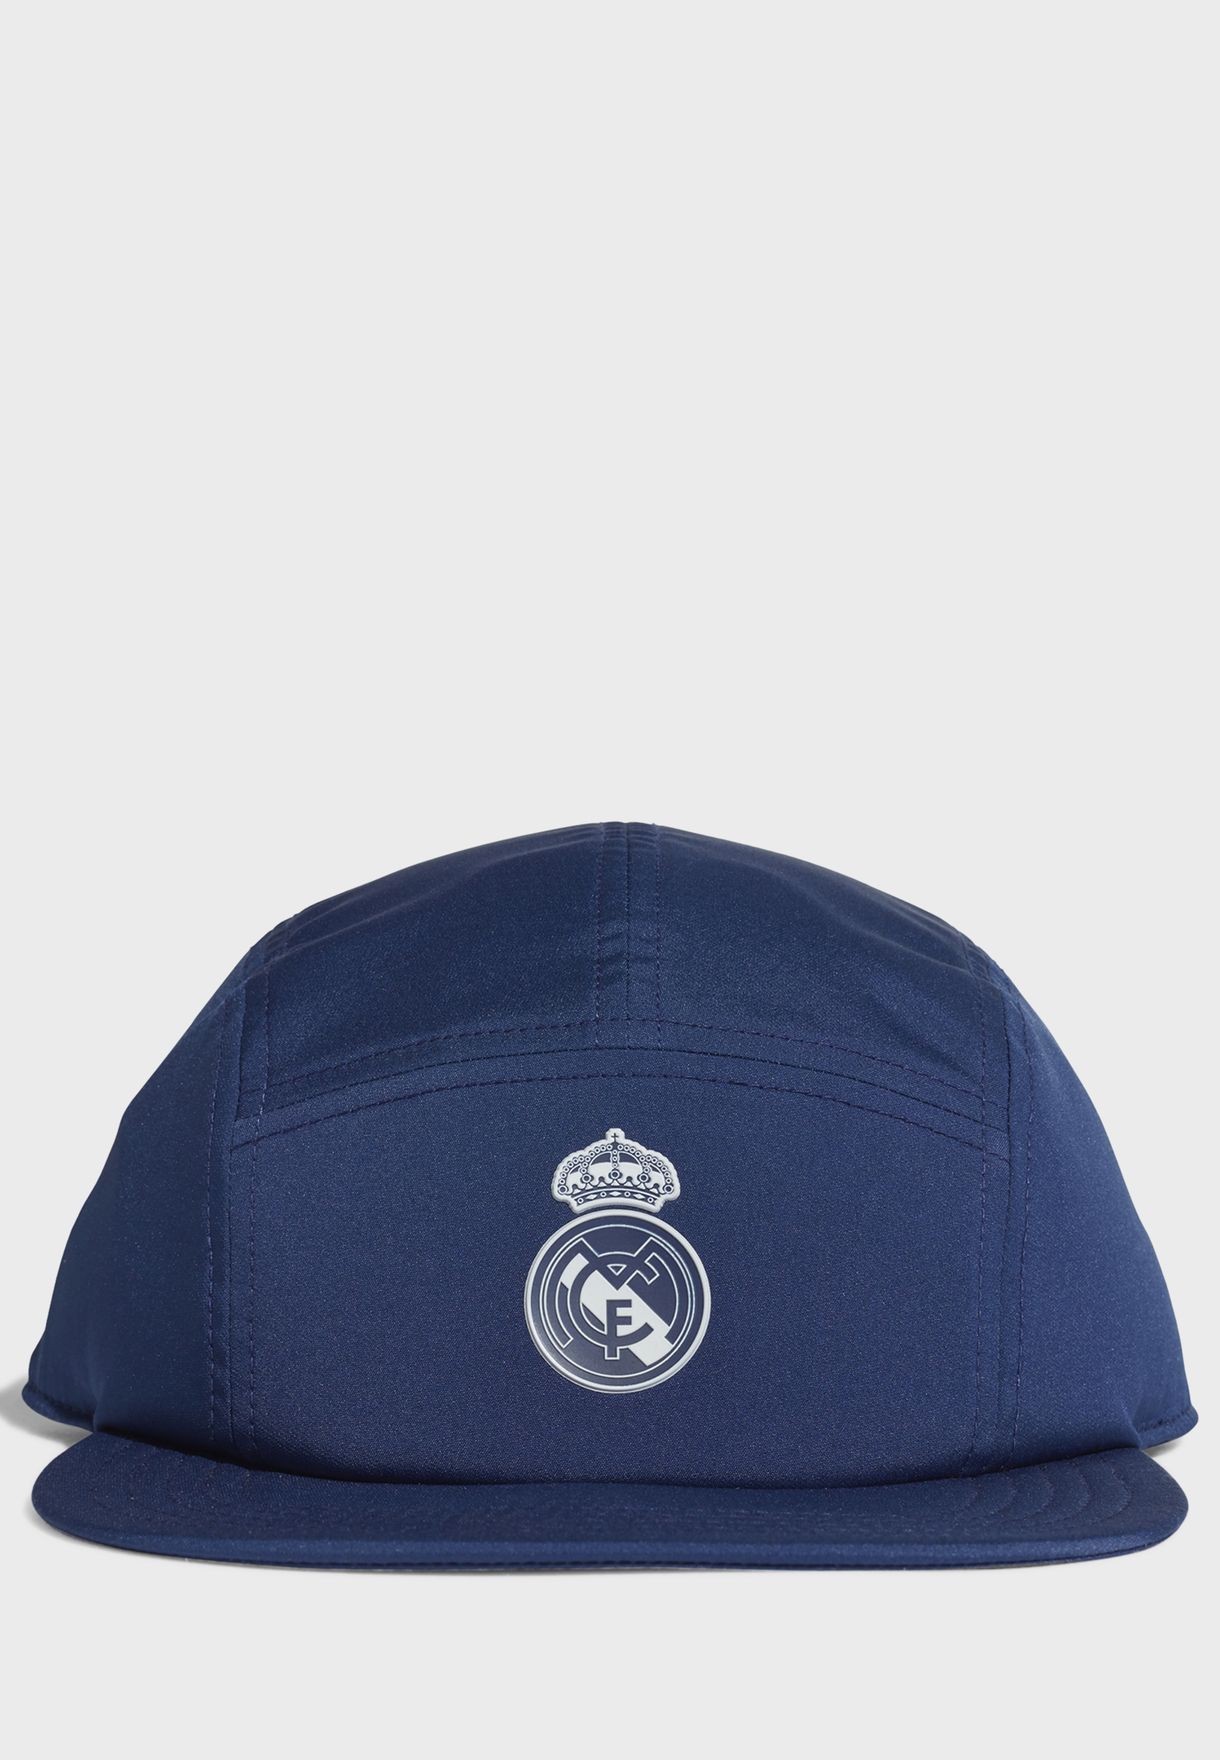 WOMEN FASHION Accessories Hat and cap Navy Blue Navy Blue Single STCN Madrid hat and cap discount 63% 